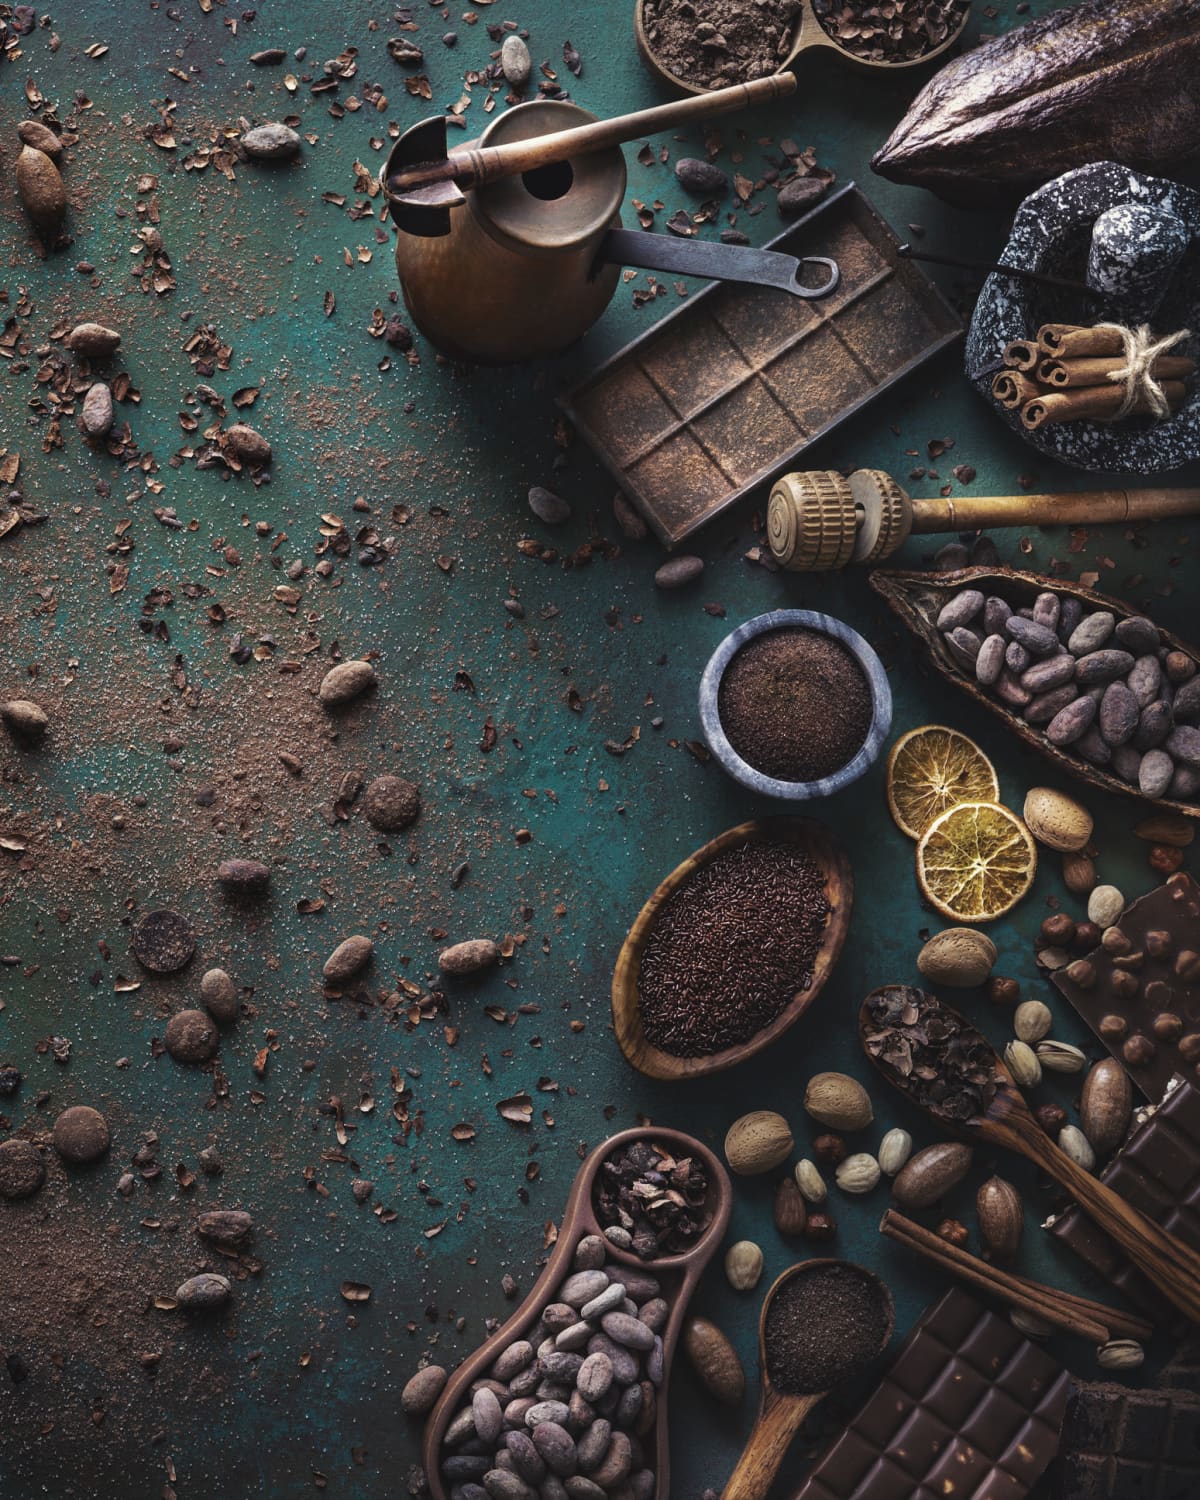 Cacao composition: Cacao fruits with dried cacao beans (nibs), cocoa powder, chocolate bar and chocolate drops (chips).